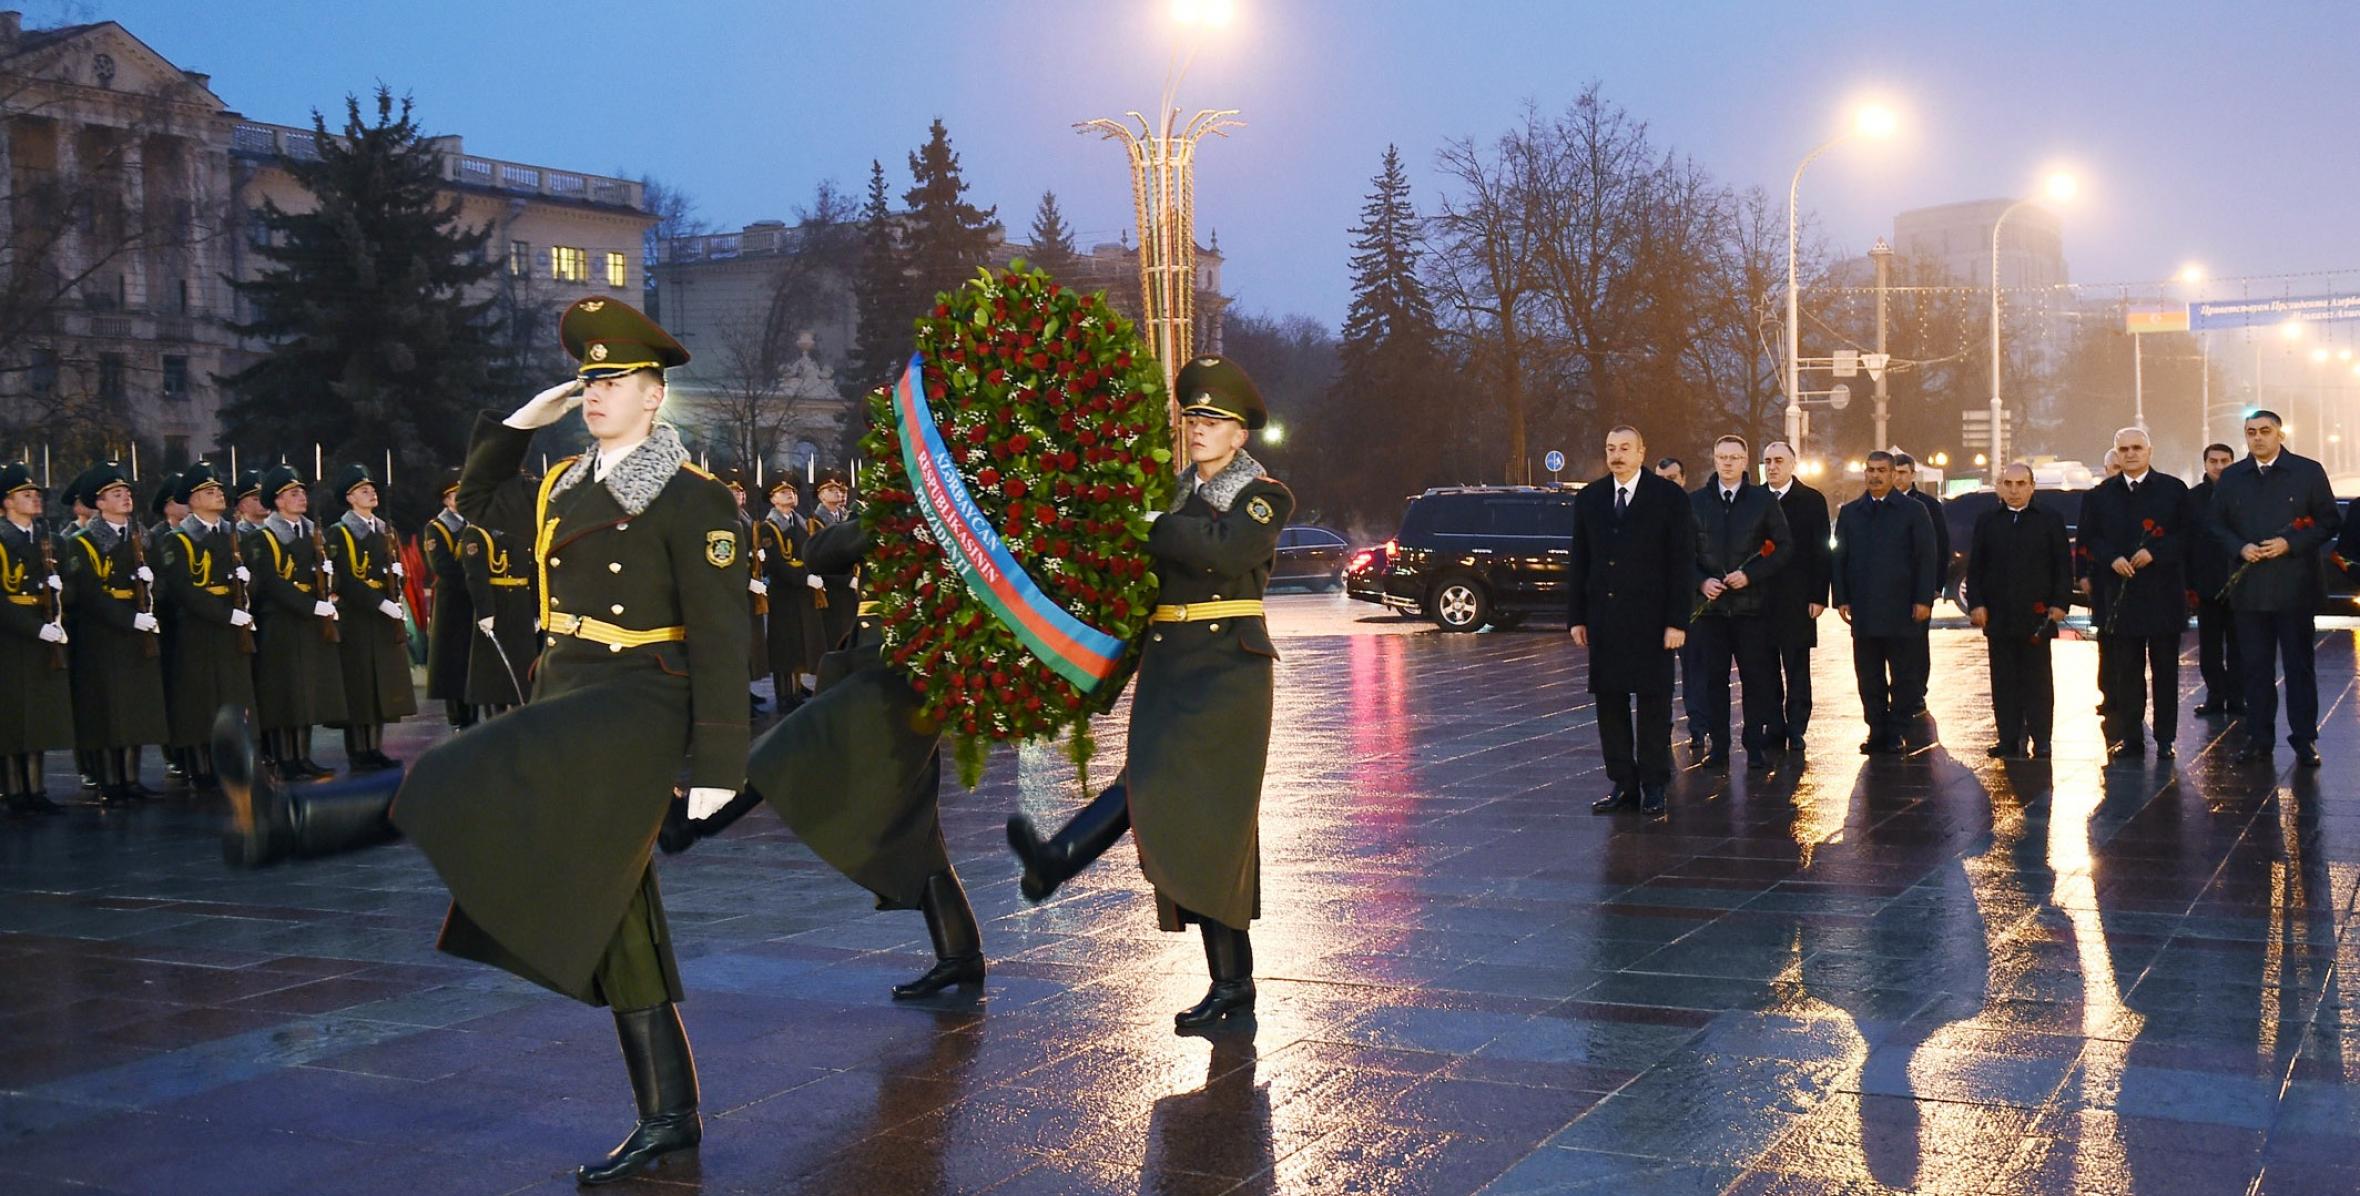 Ilham Aliyev visited Victory Square in Minsk